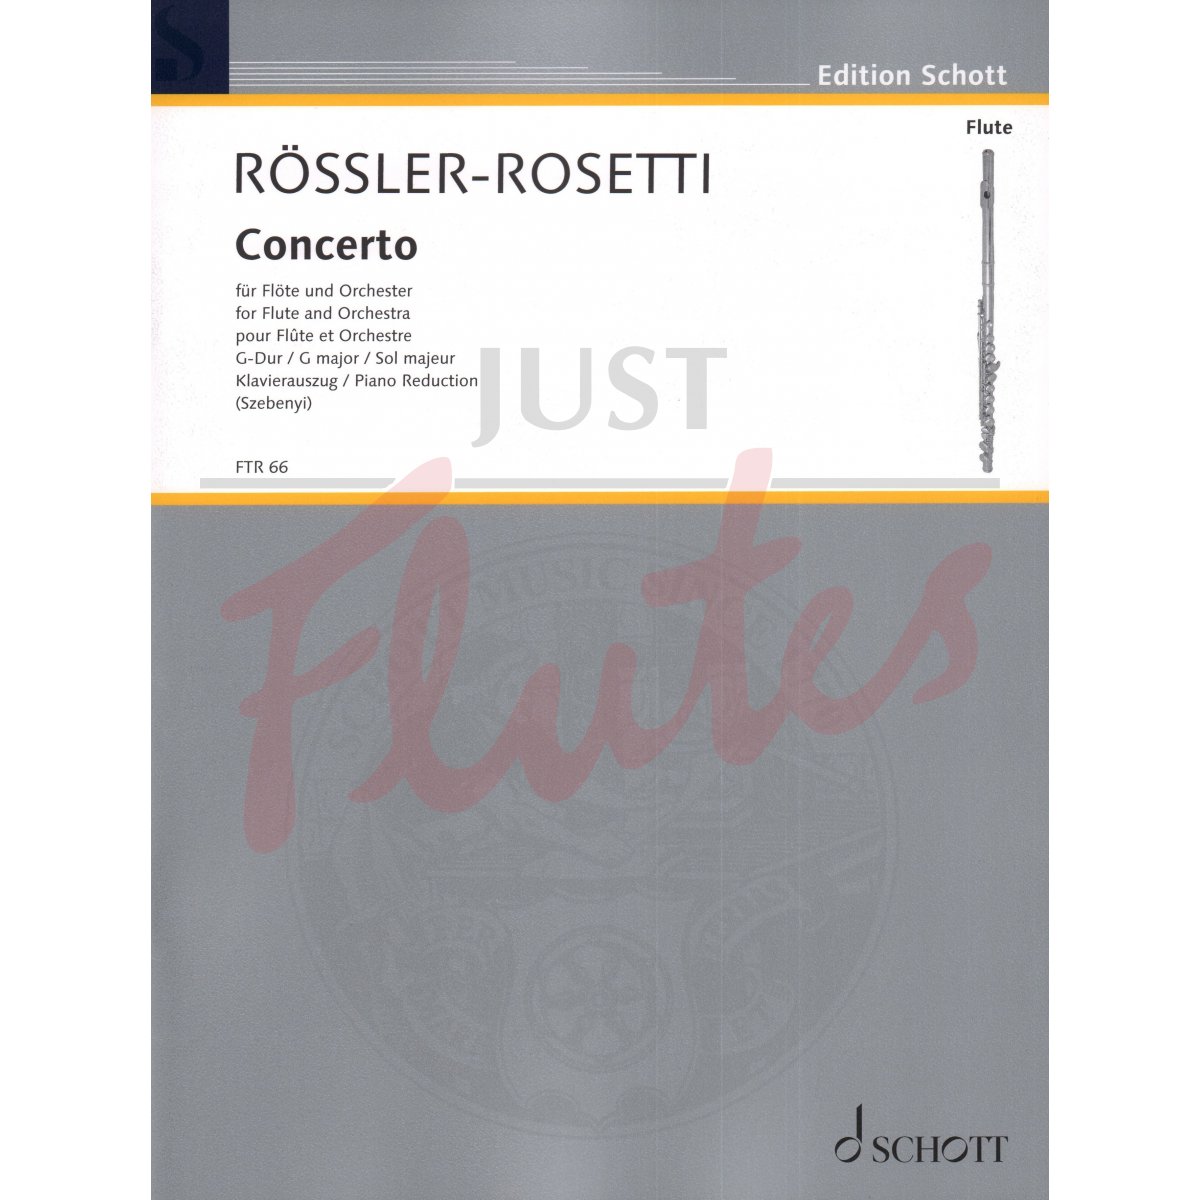 Concerto in G major for Flute and Piano